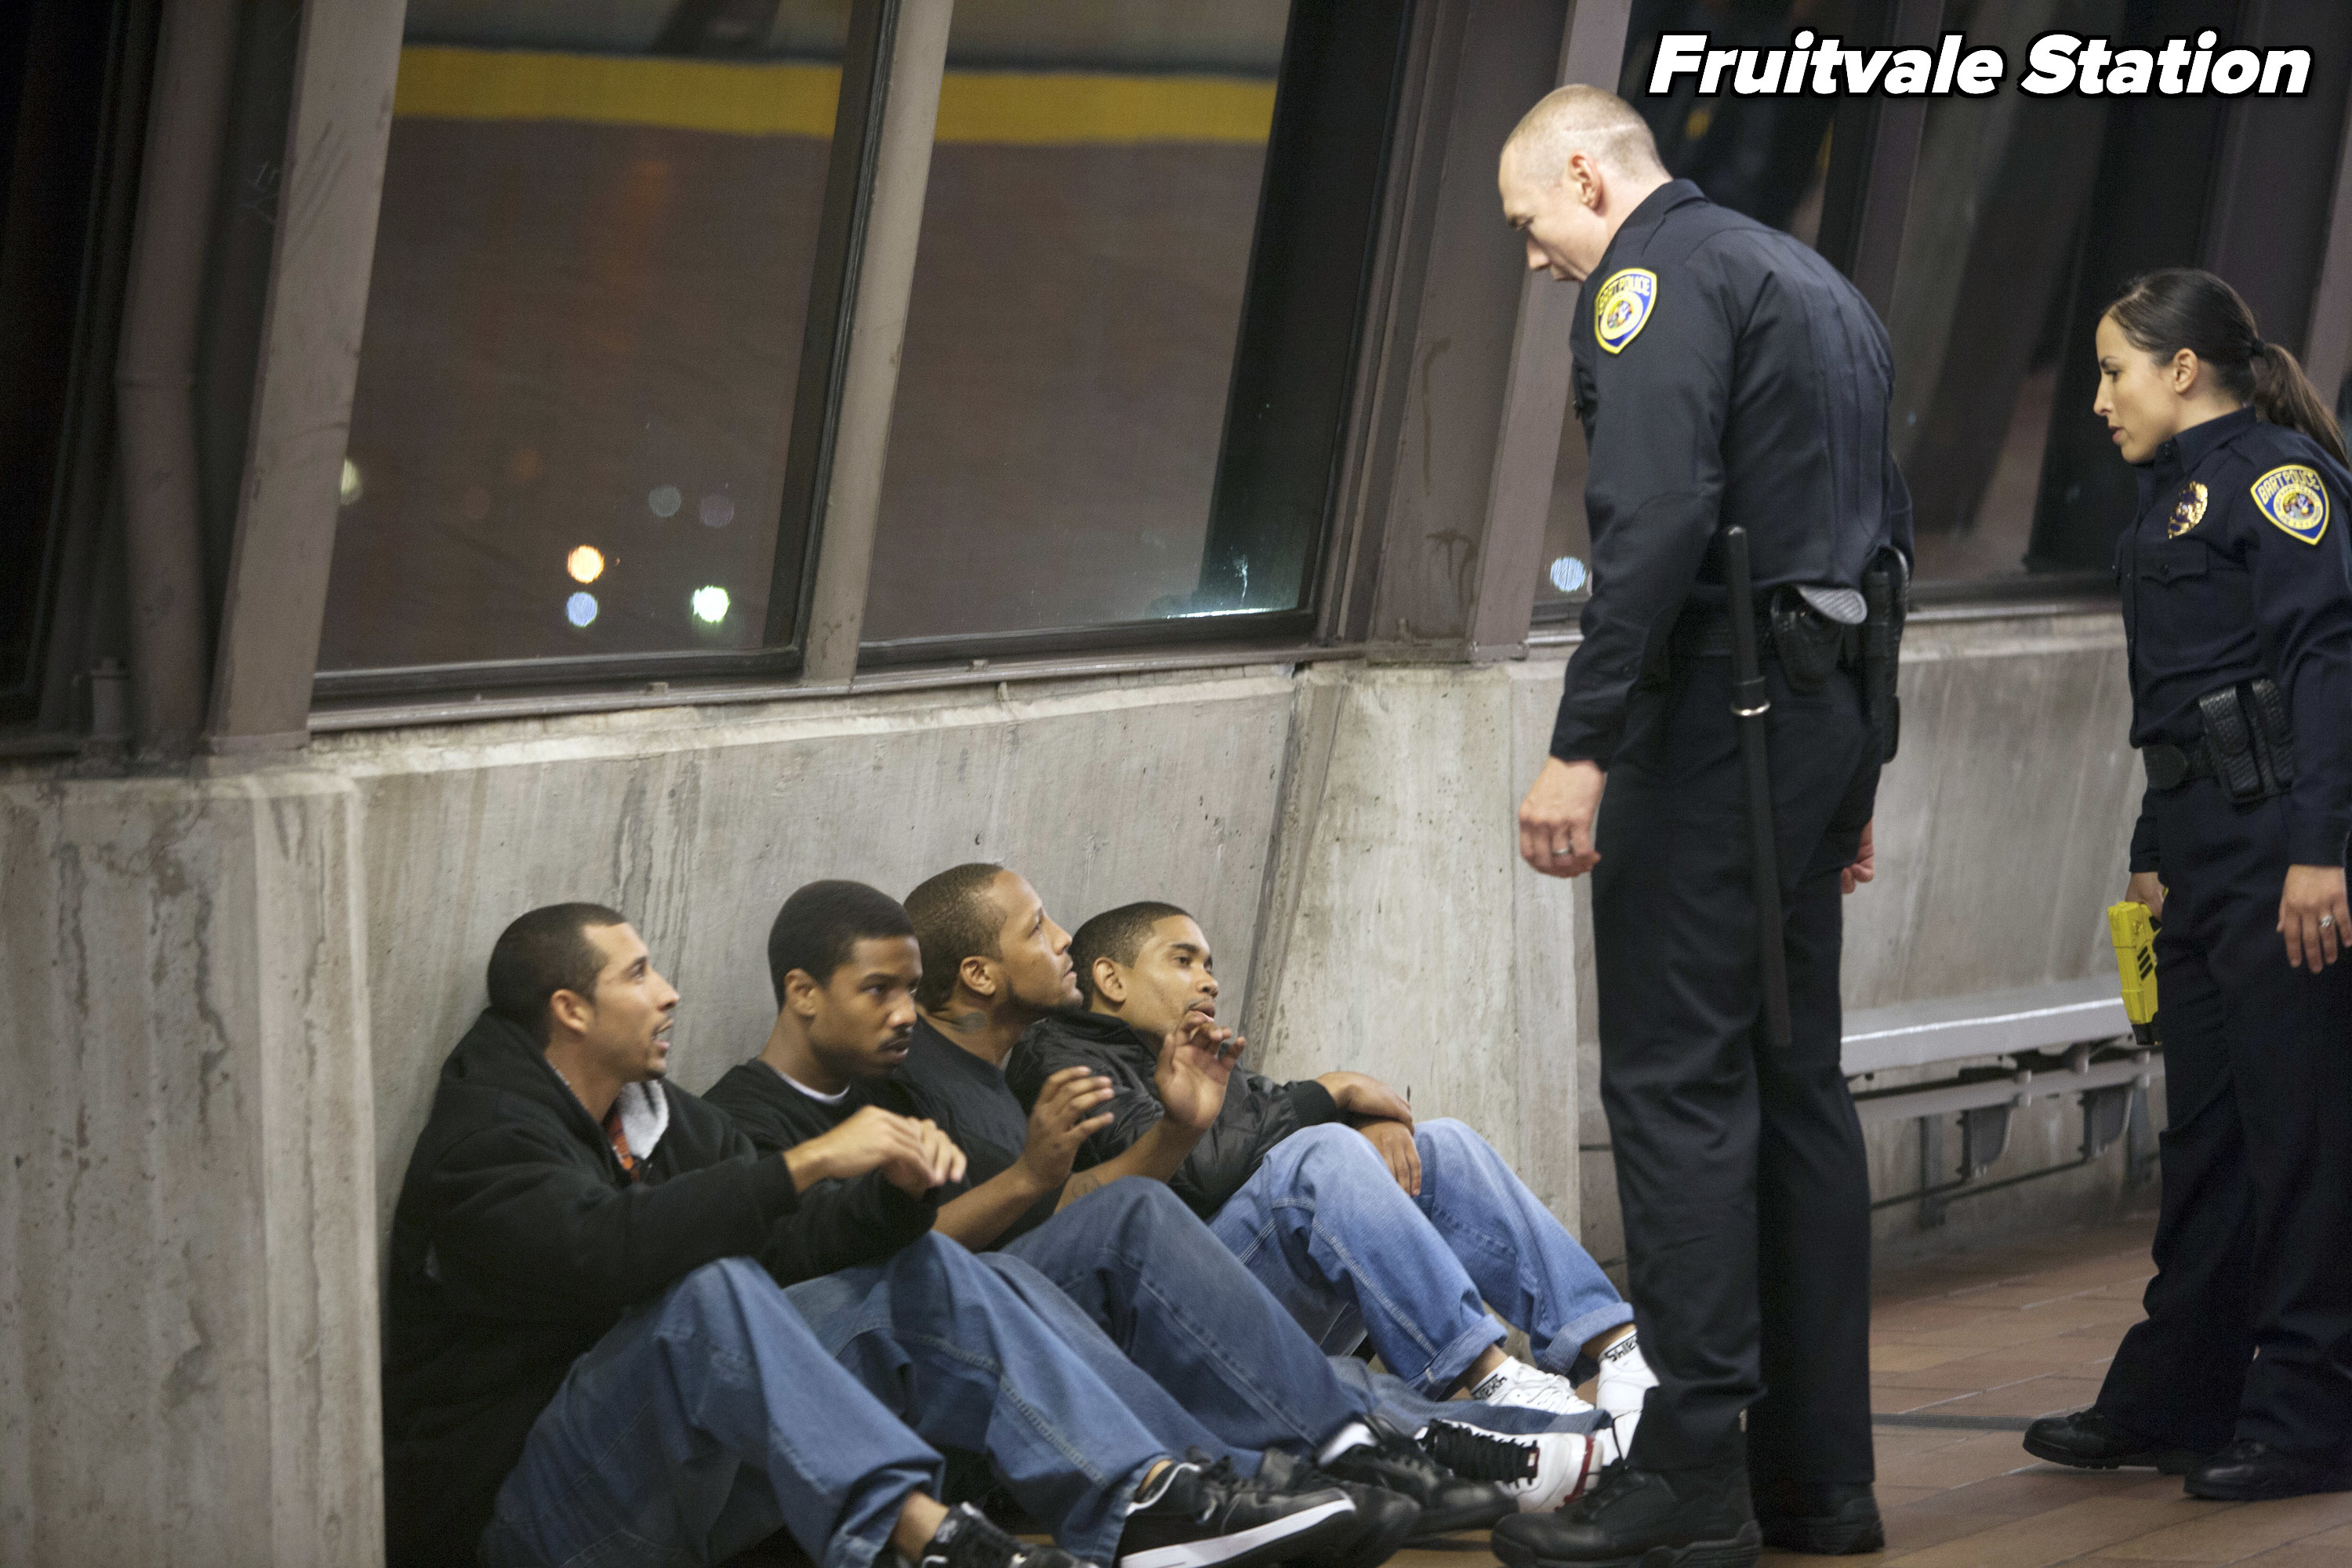 Two cops standing over four young men sitting on the ground from &quot;Fruitvale Station&quot;